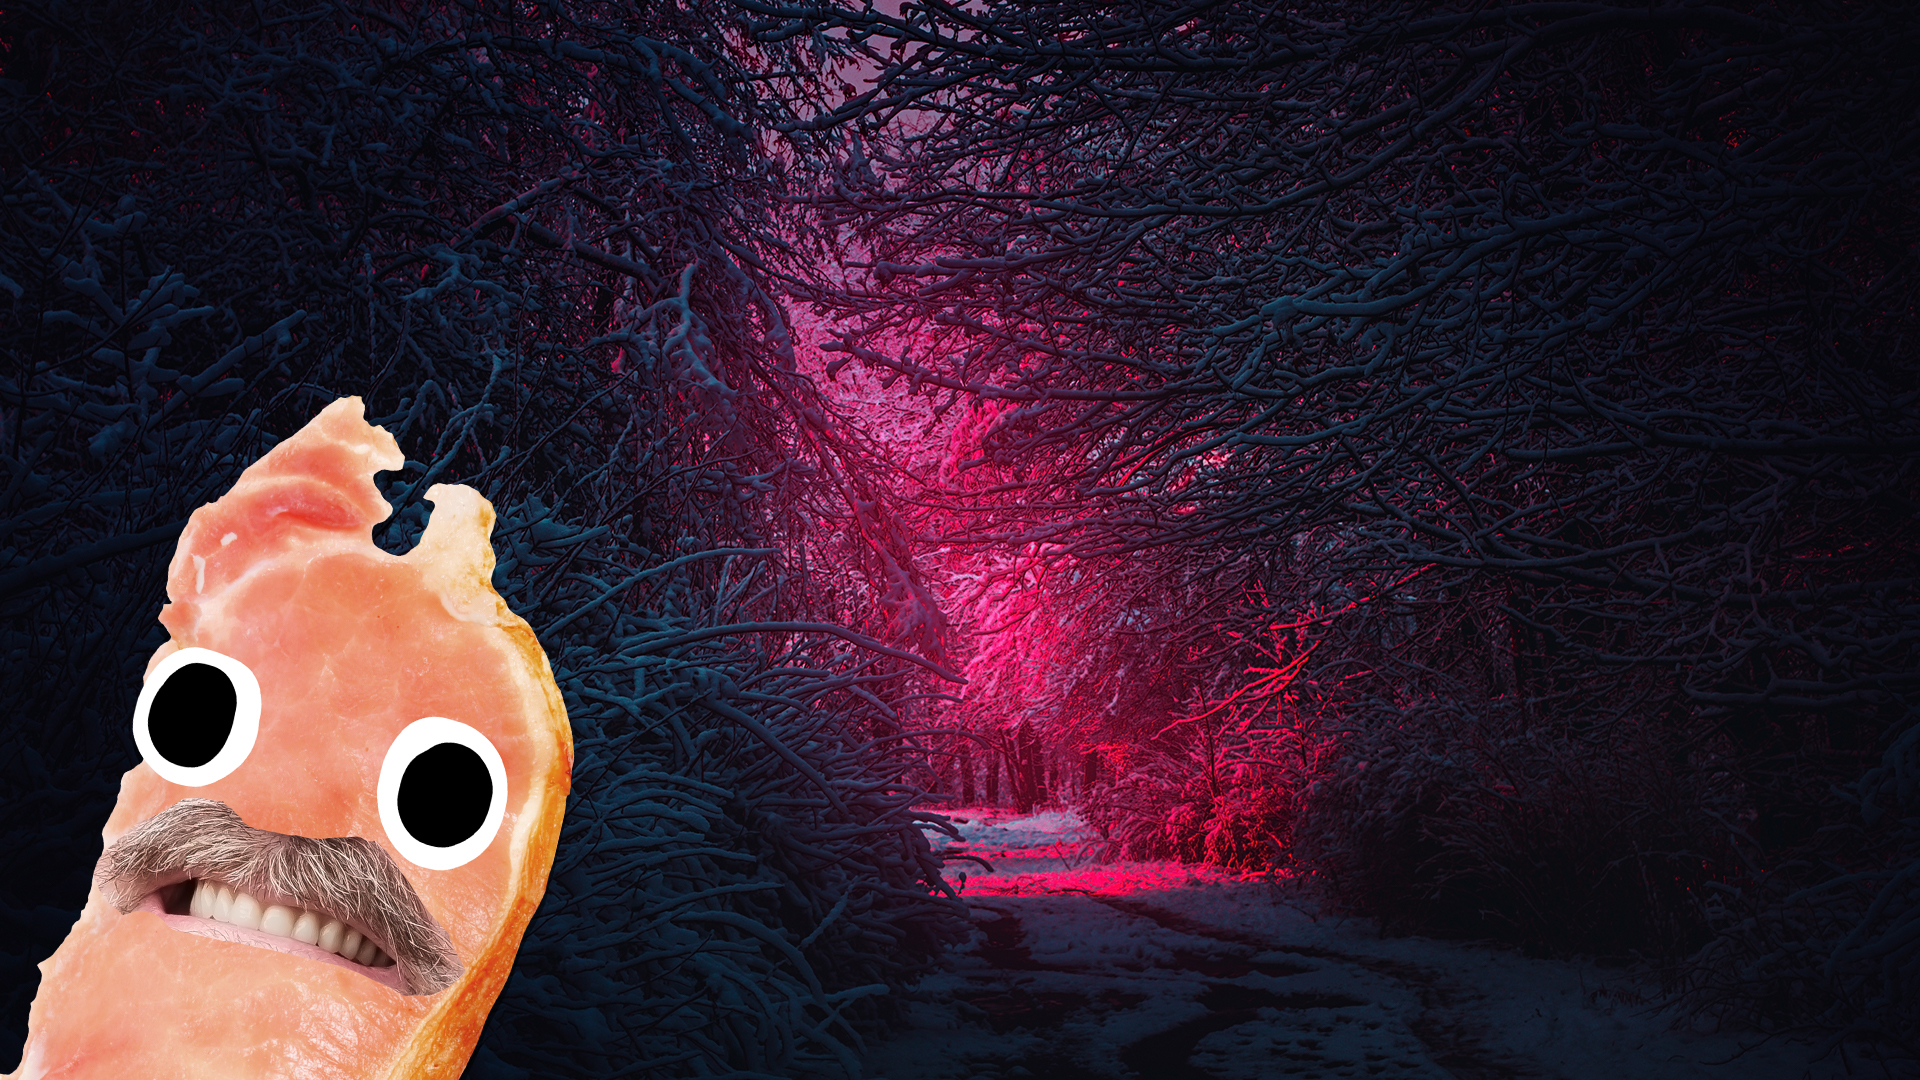 A scared piece of bacon in a spooky forest